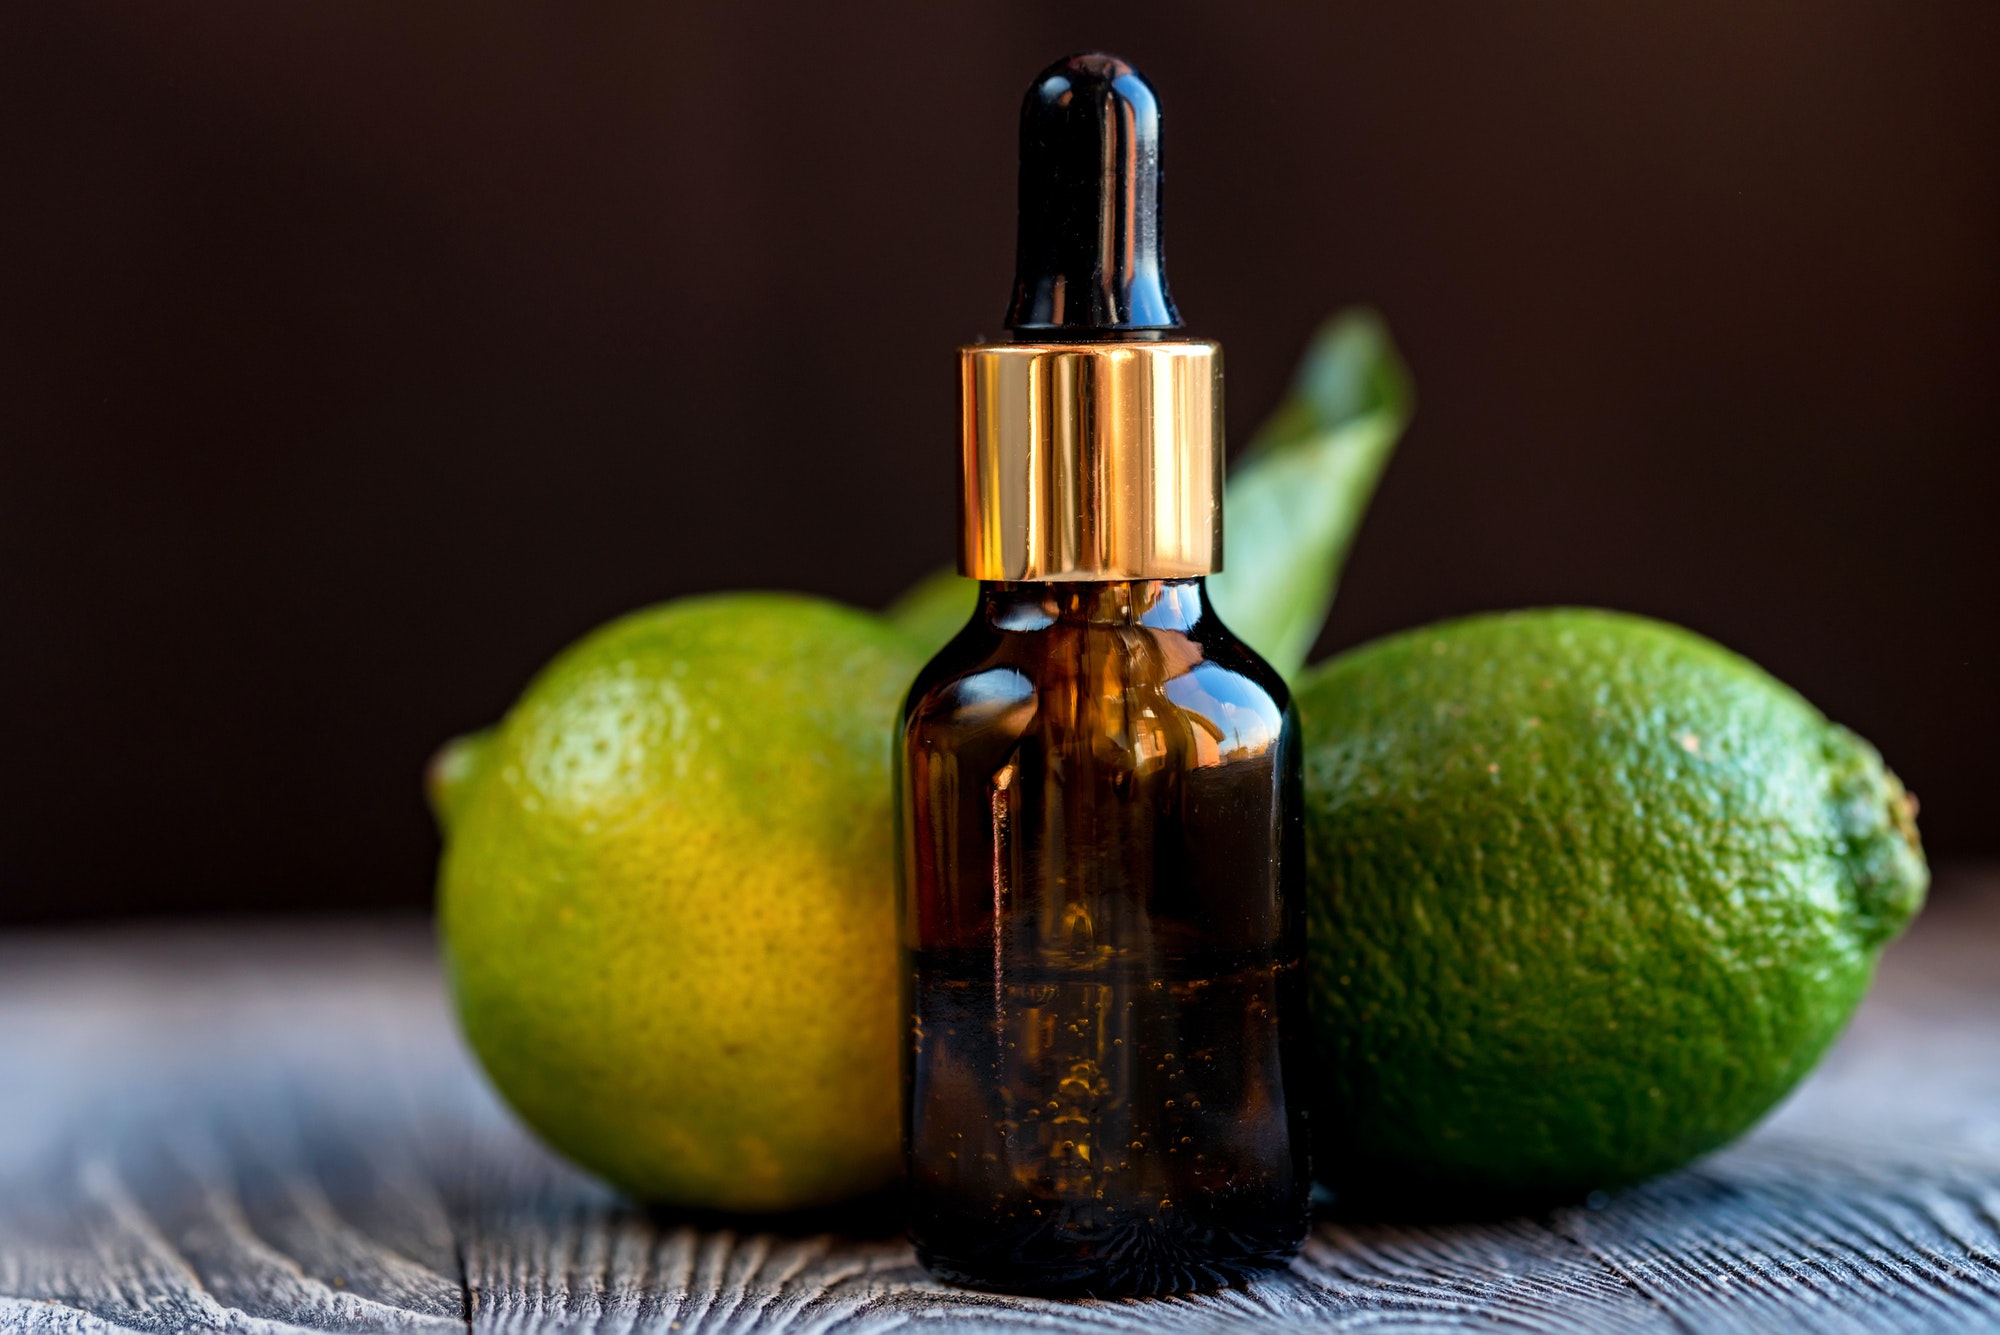 Dropper bottle of lime essential oil